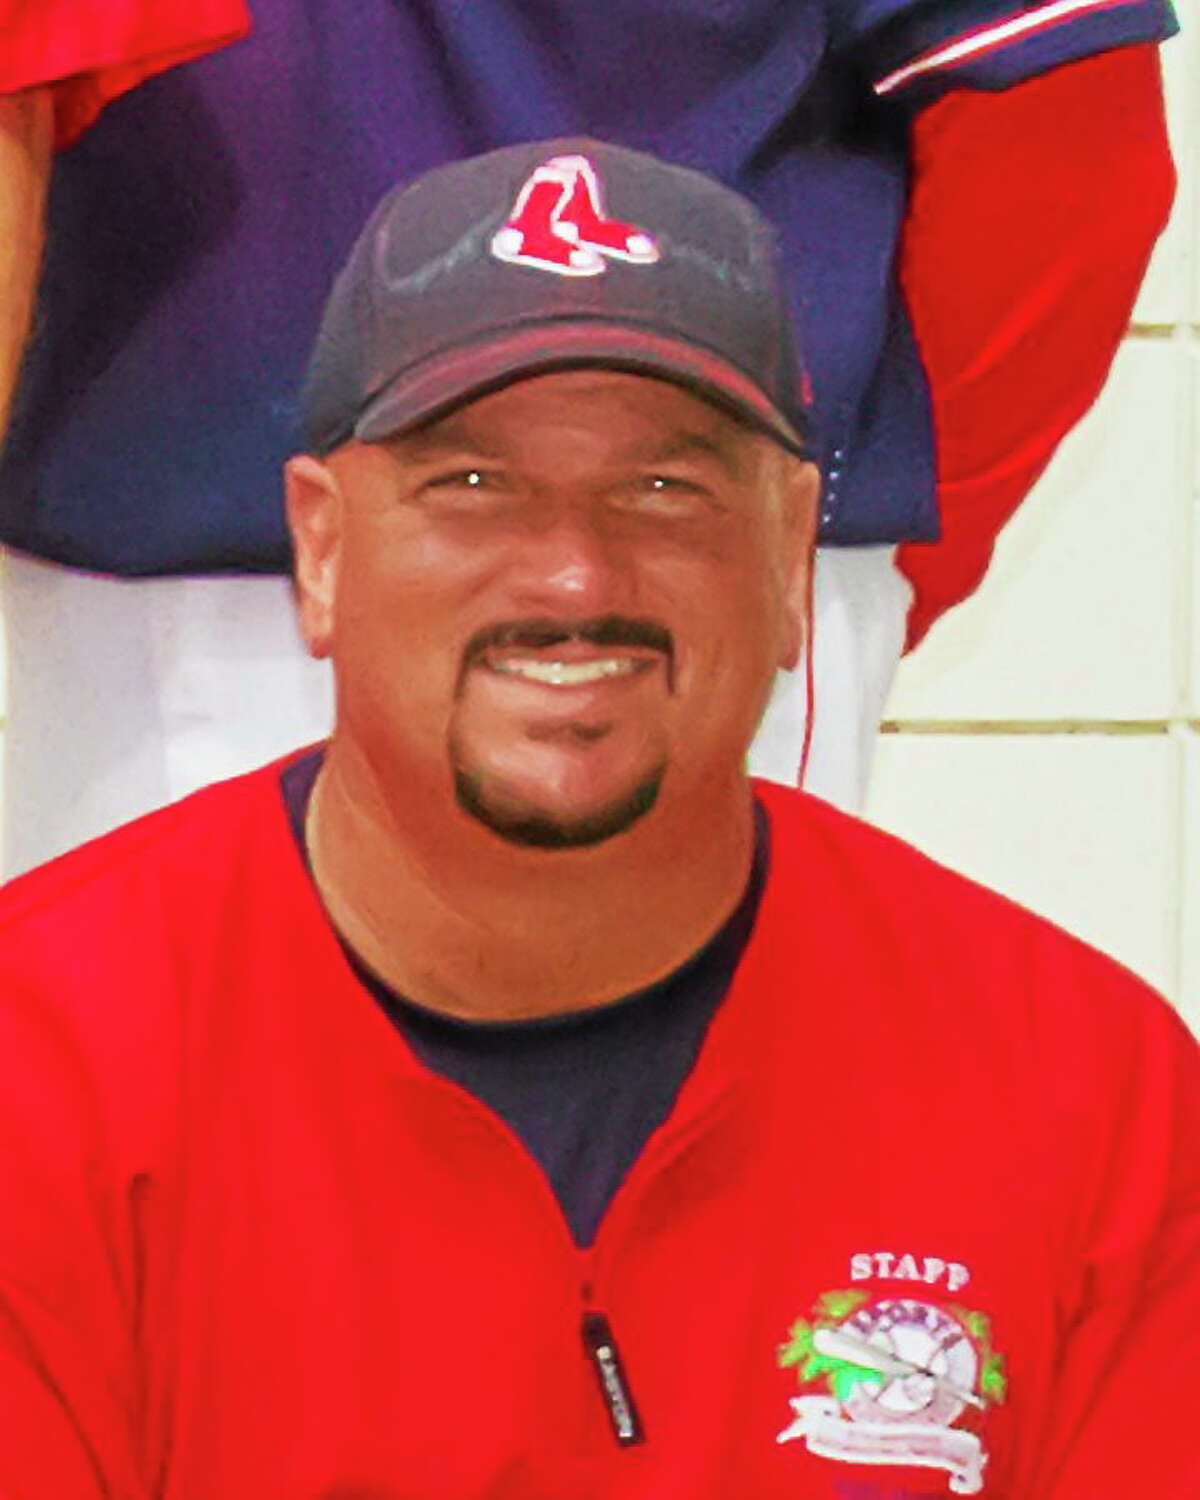 Jim Corsi, a former Red Sox player